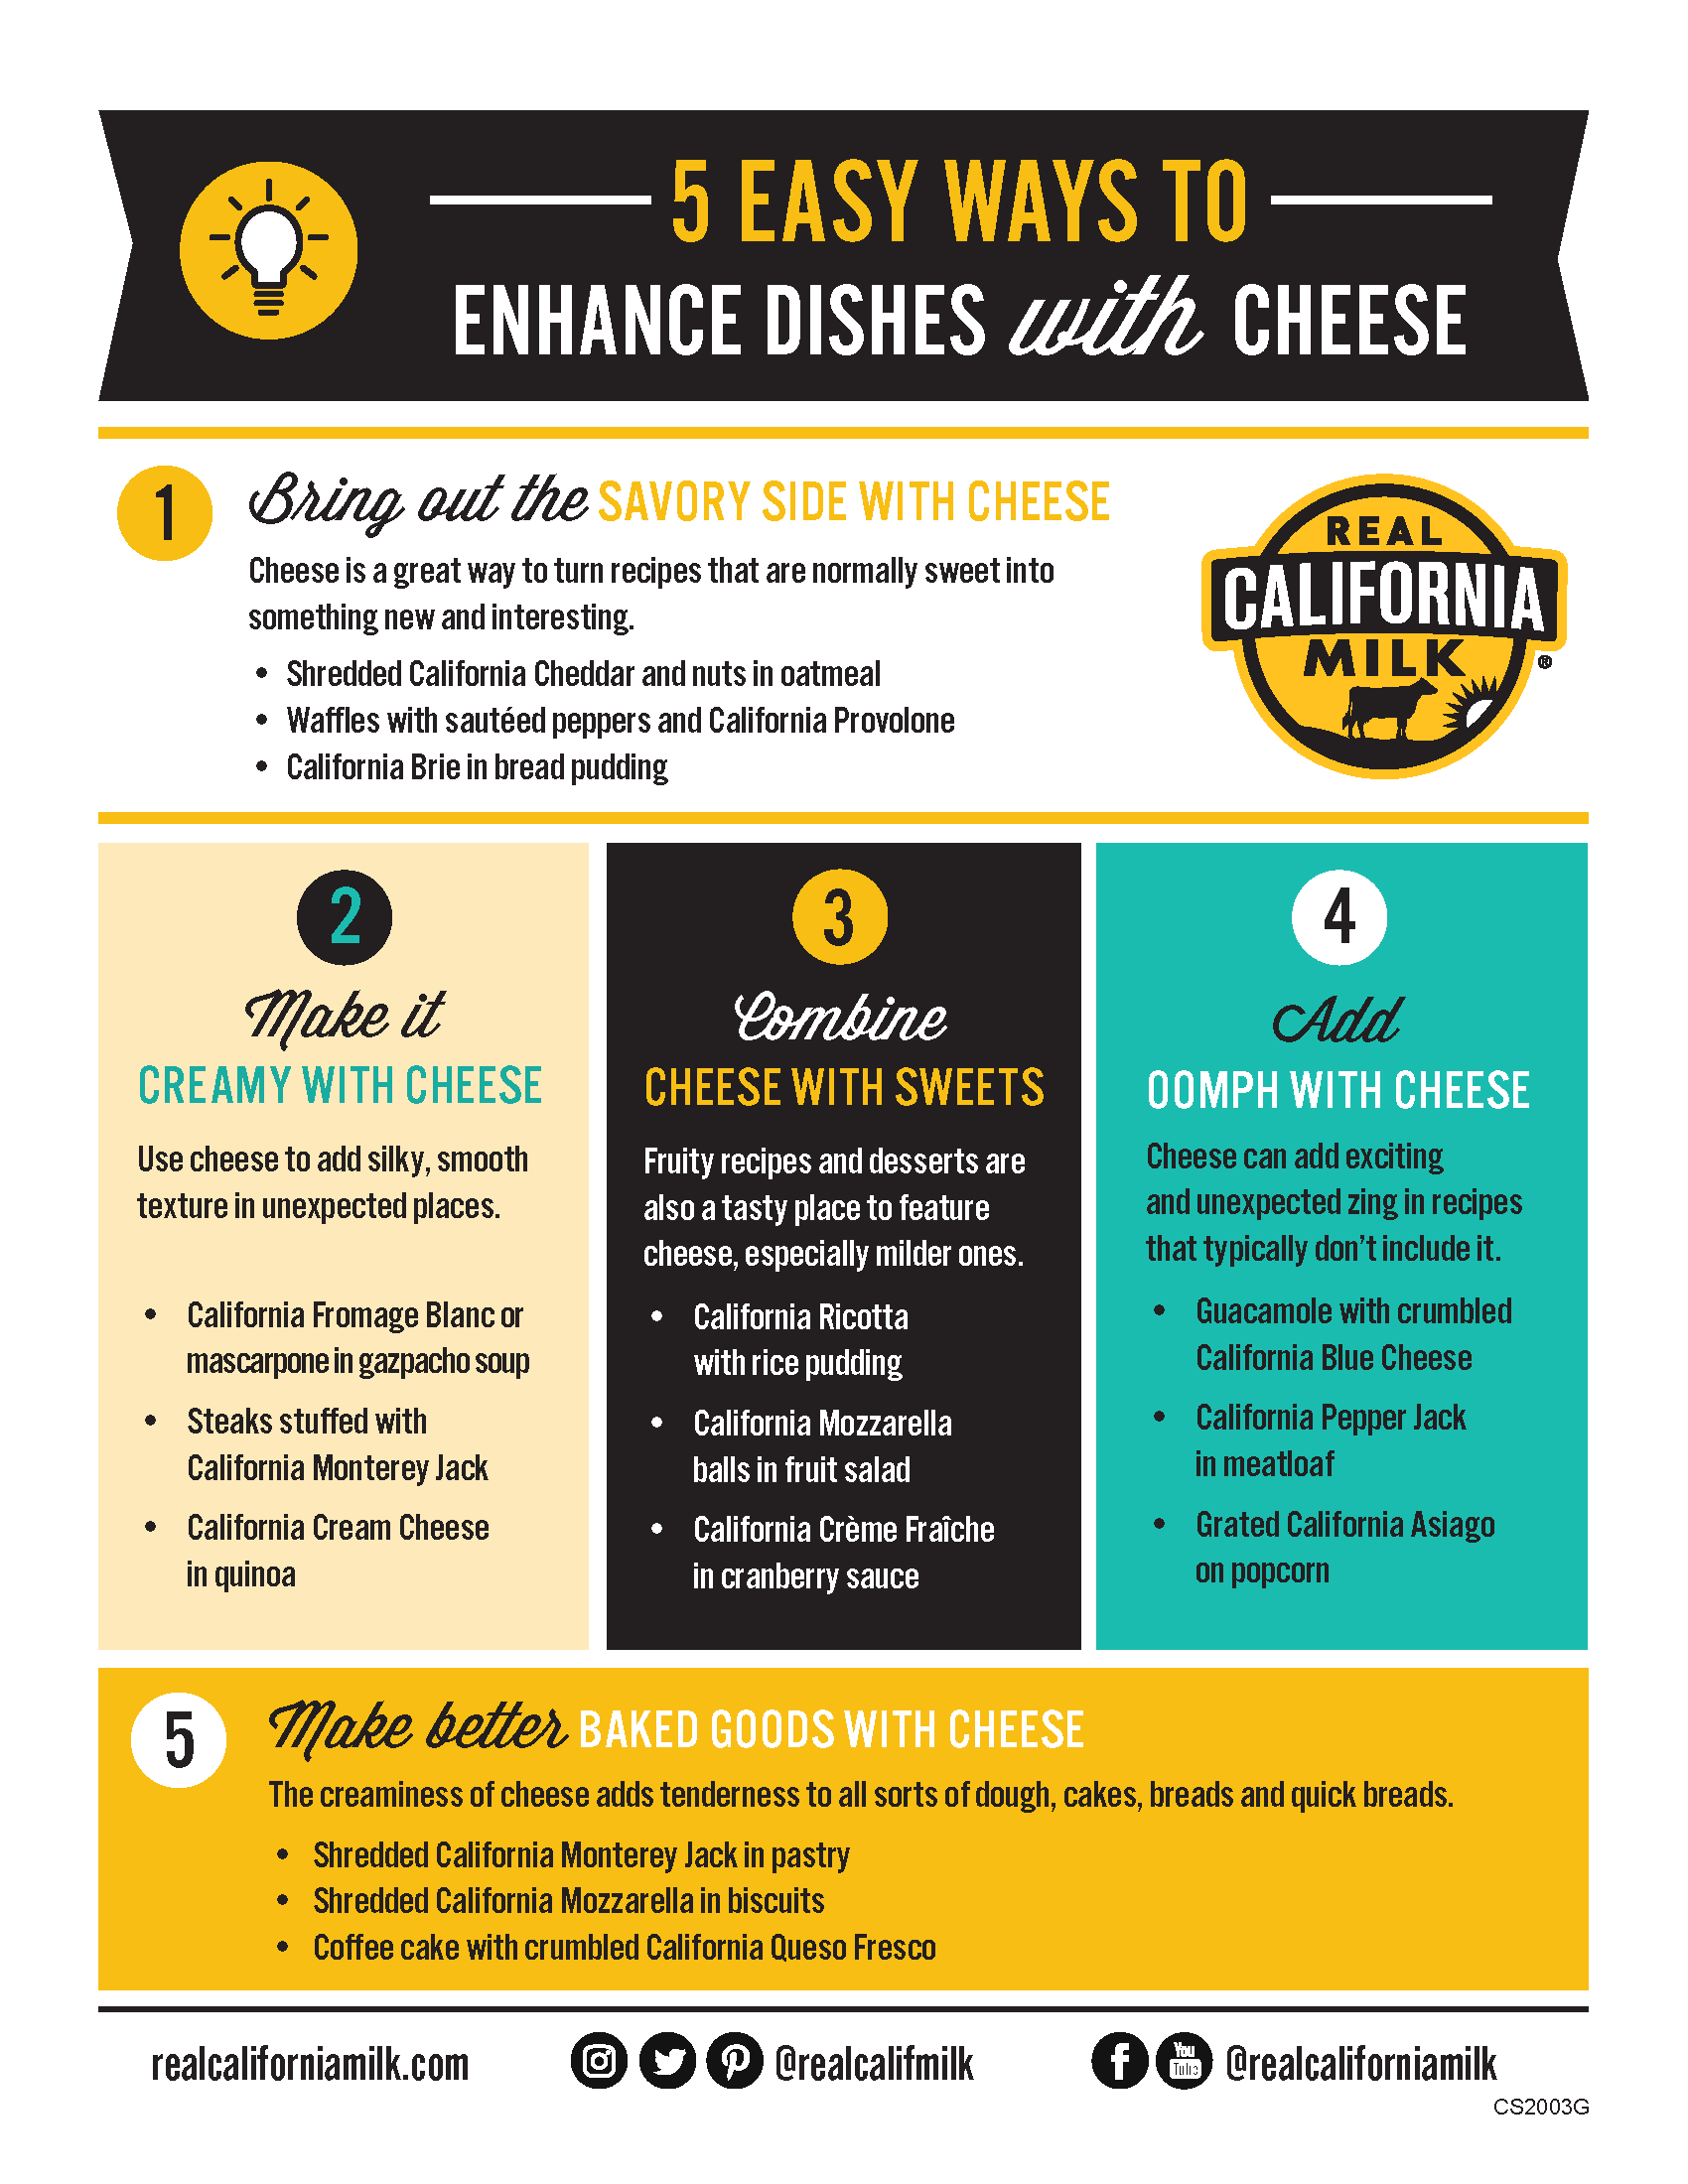 5 Easy Ways to Enhance Dishes With Cheese